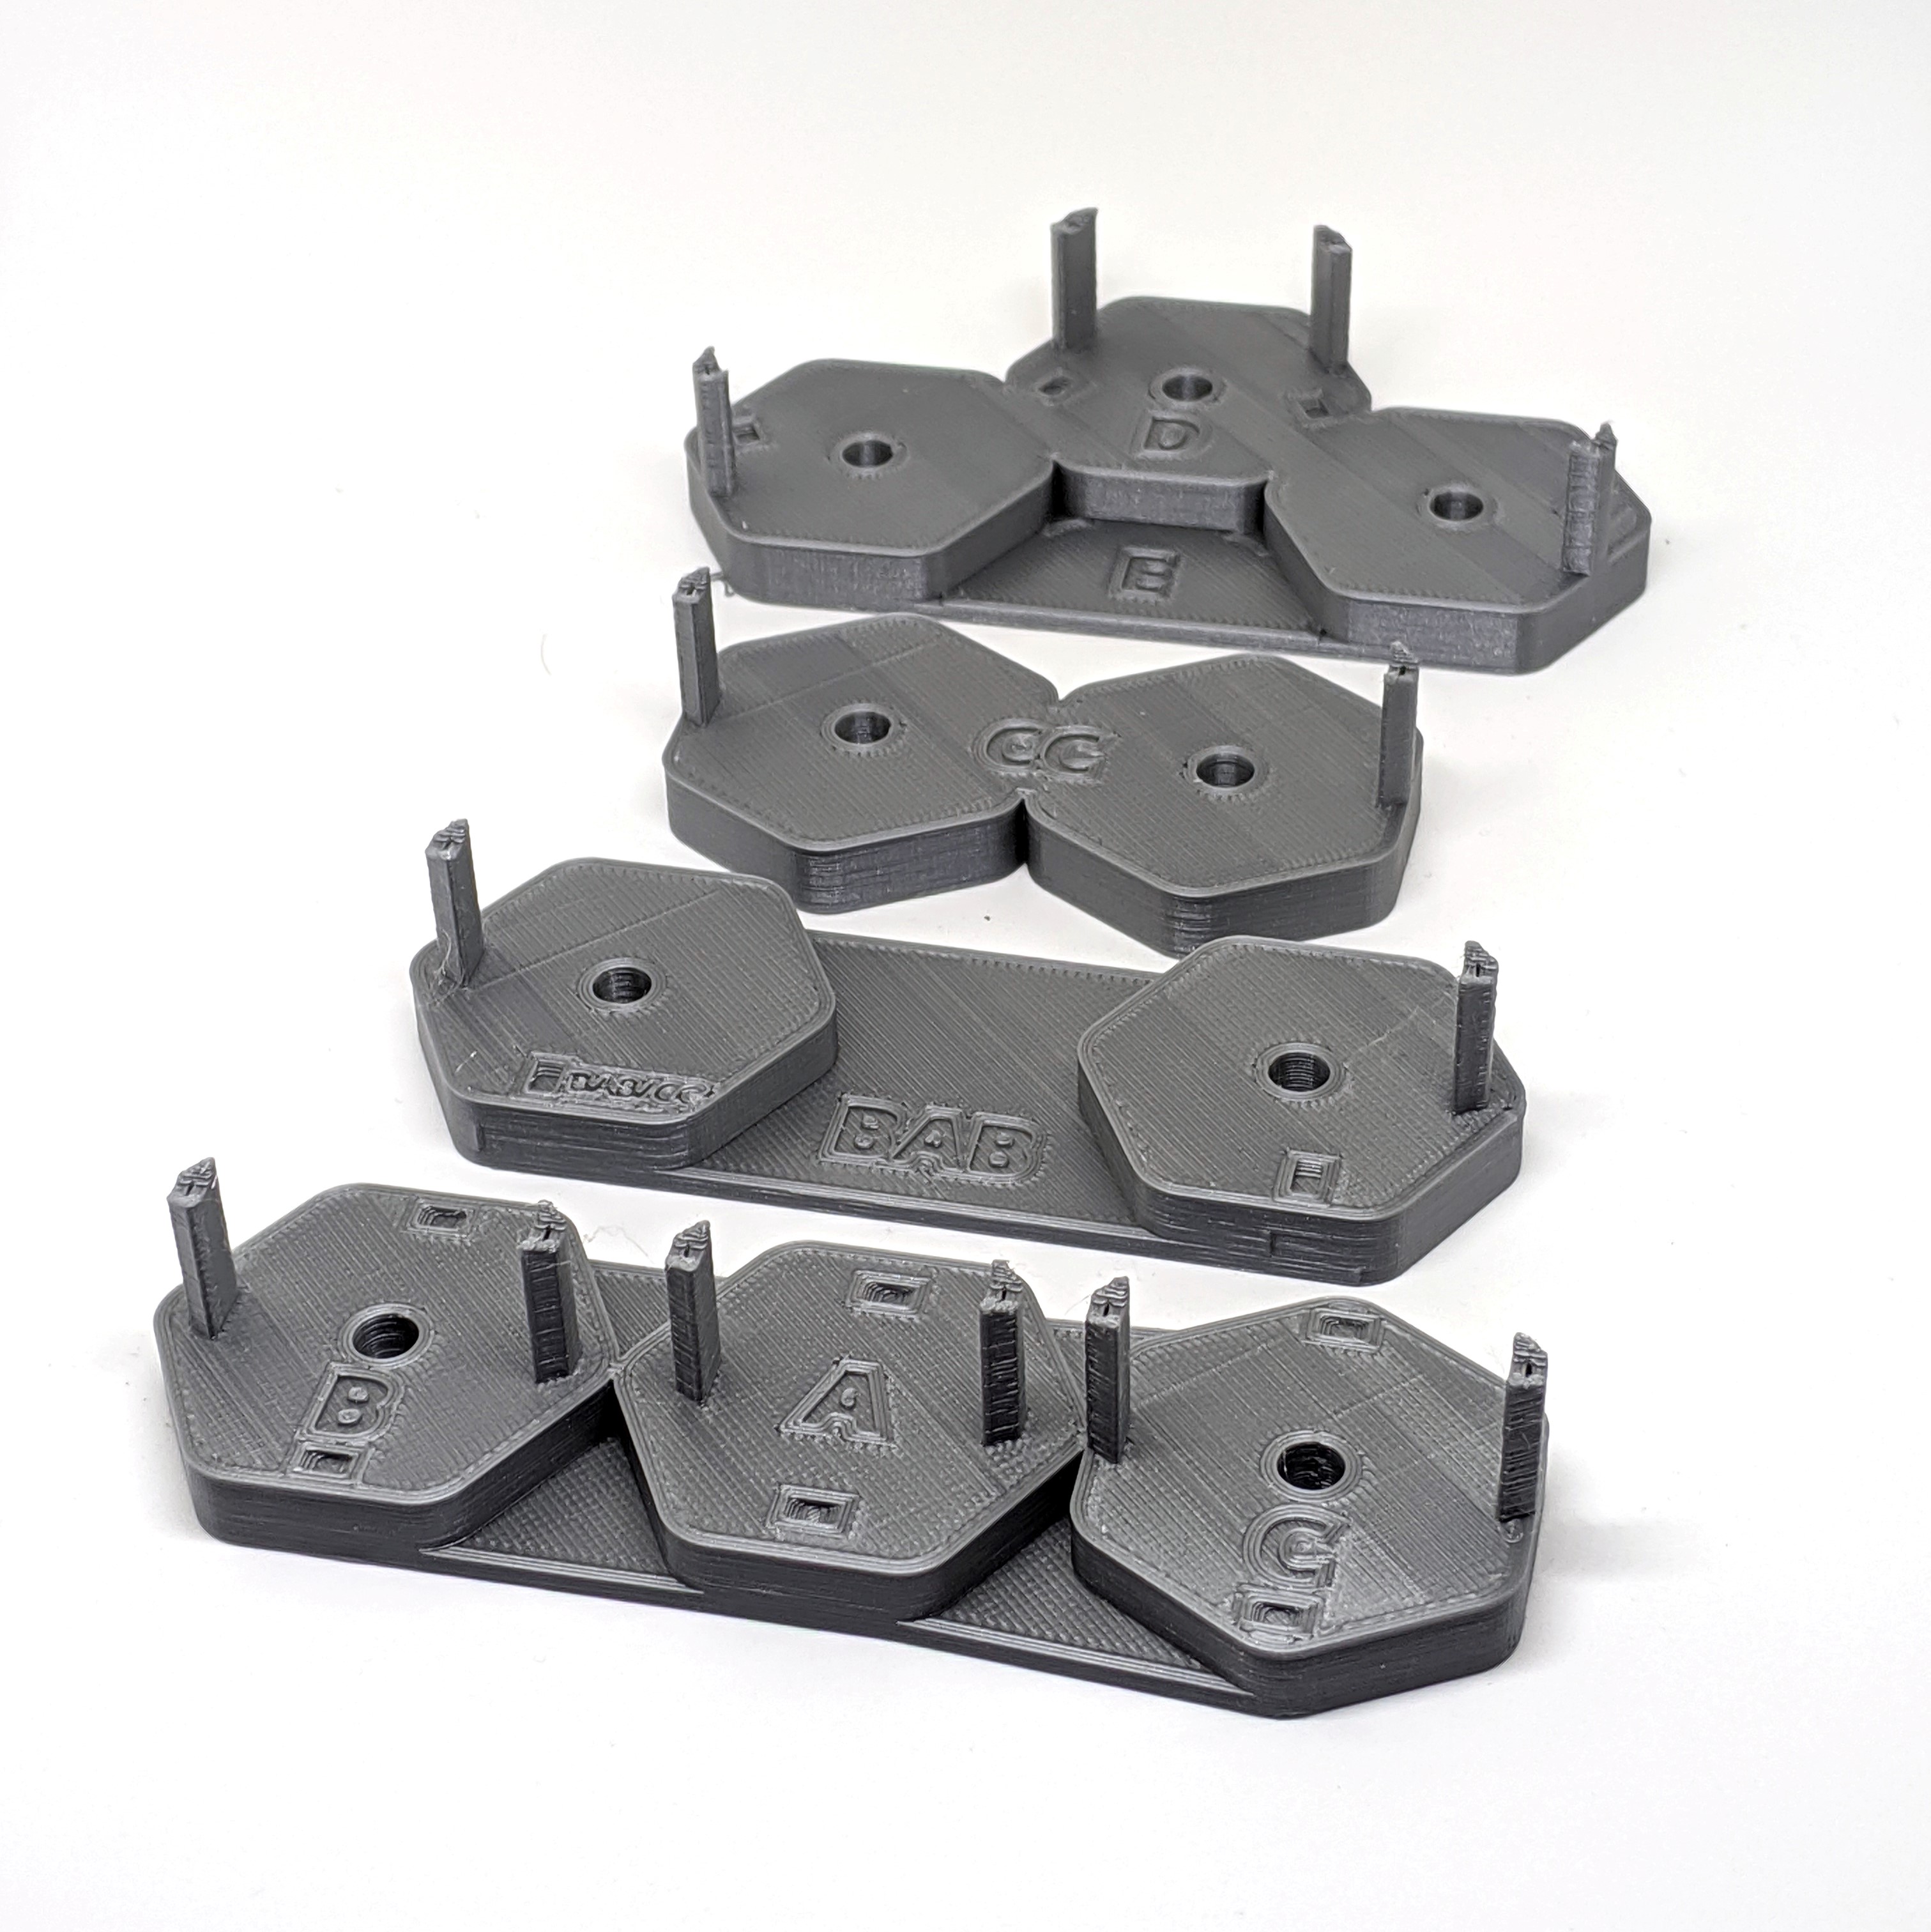 Magnet Insertion & Drill Guide Tools For Axolote Hex Walls